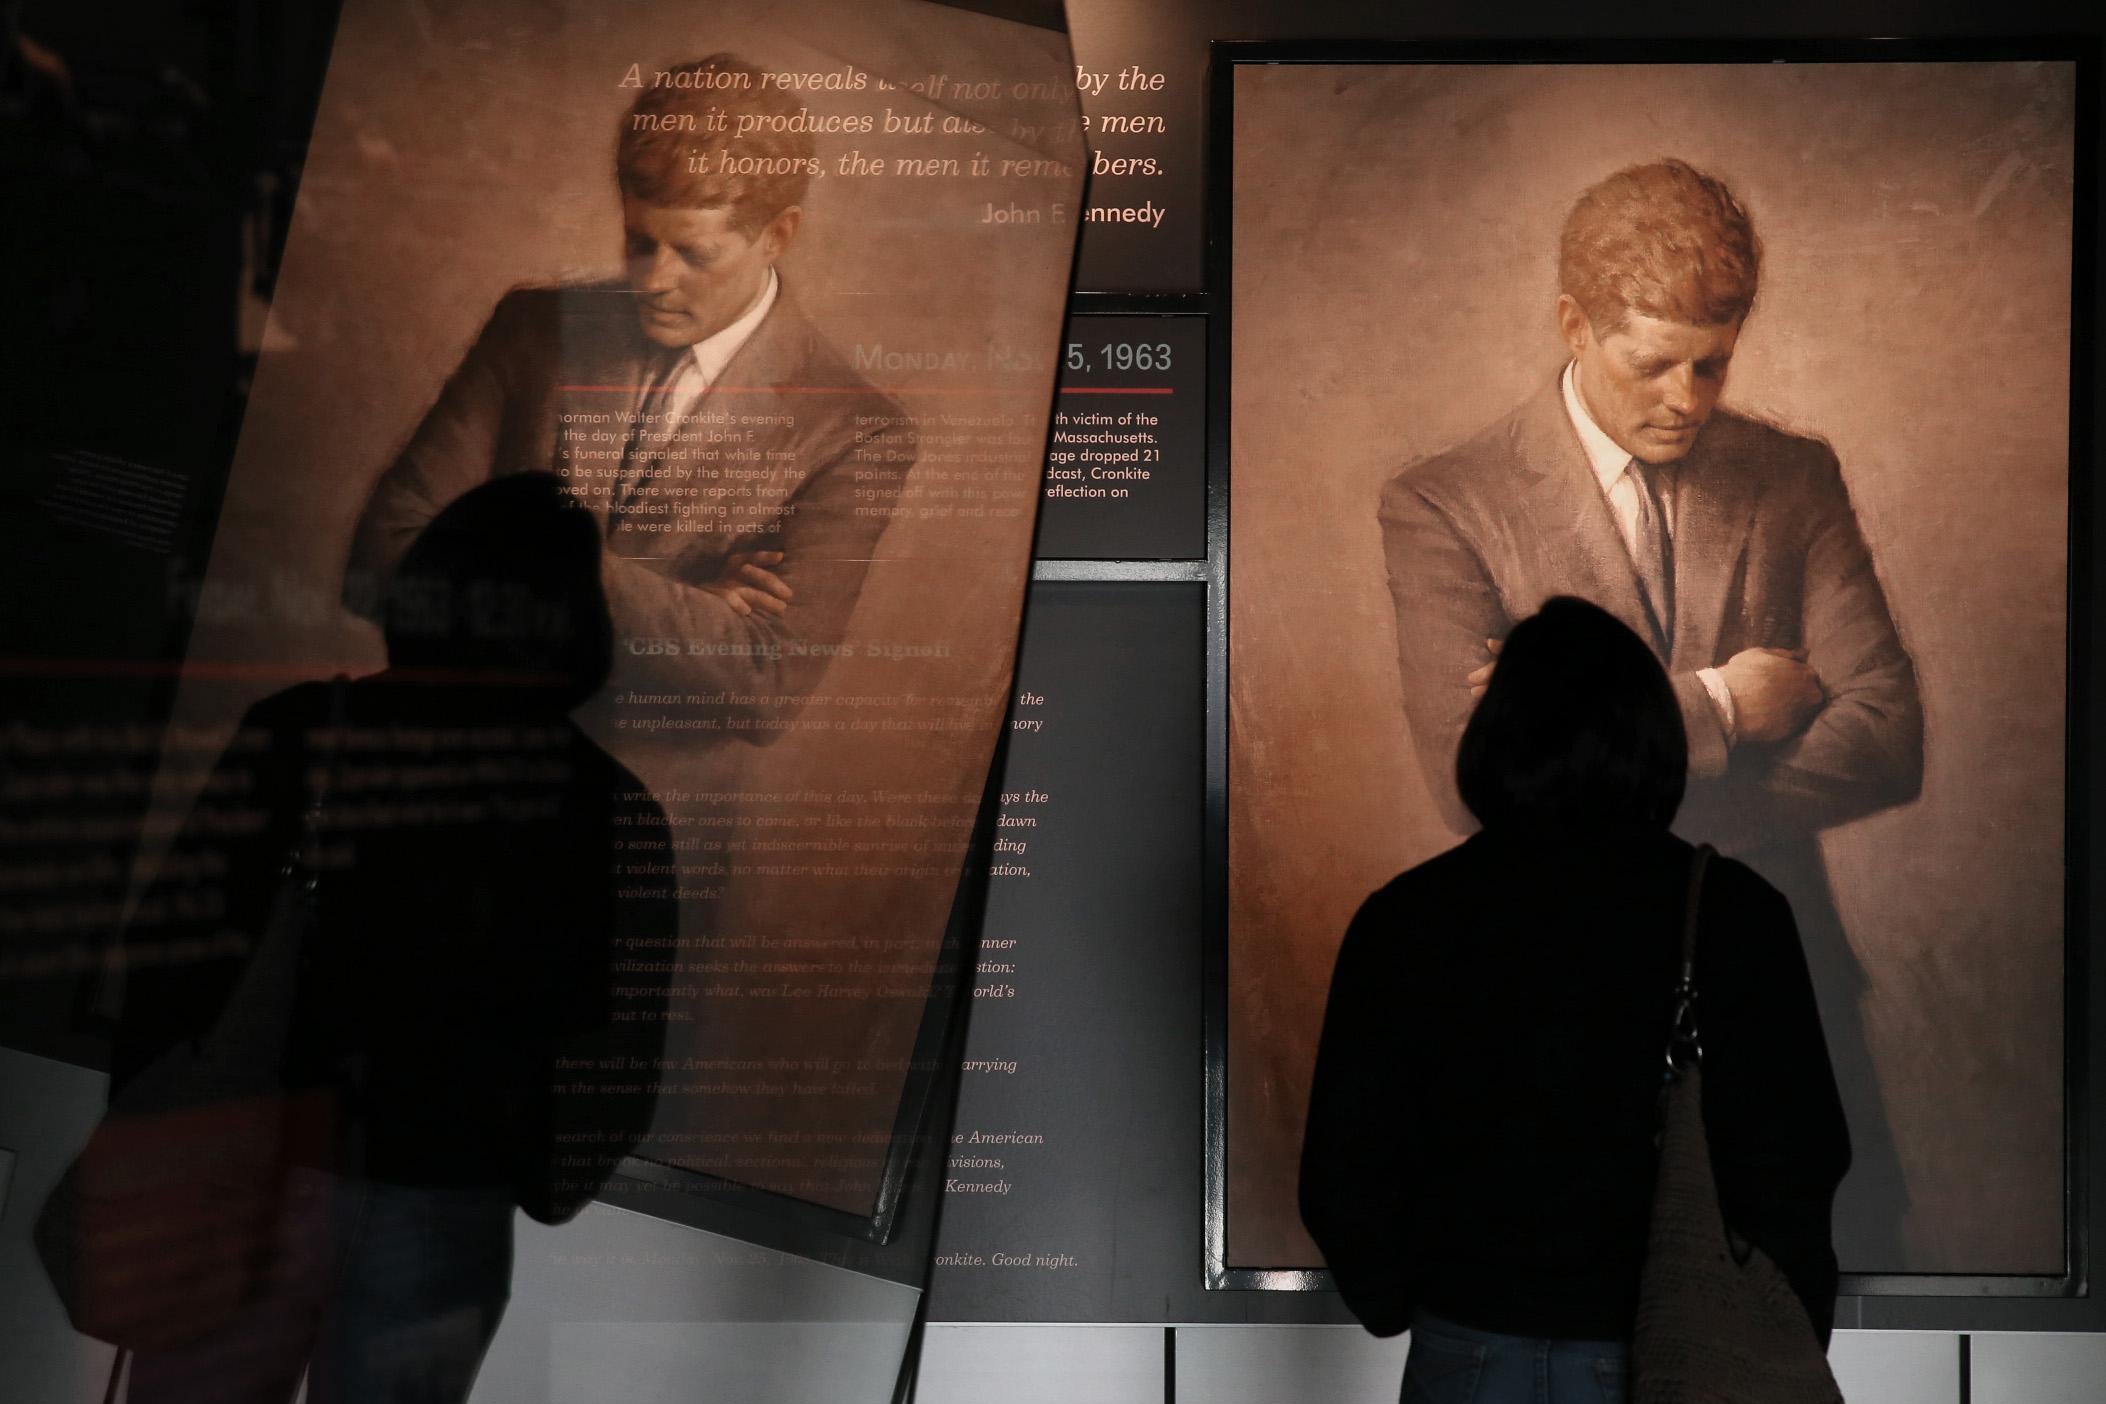 People tour an exhibit at the Newseum dedicated to John F. Kennedy on November 22, 2013, in Washington, D.C.